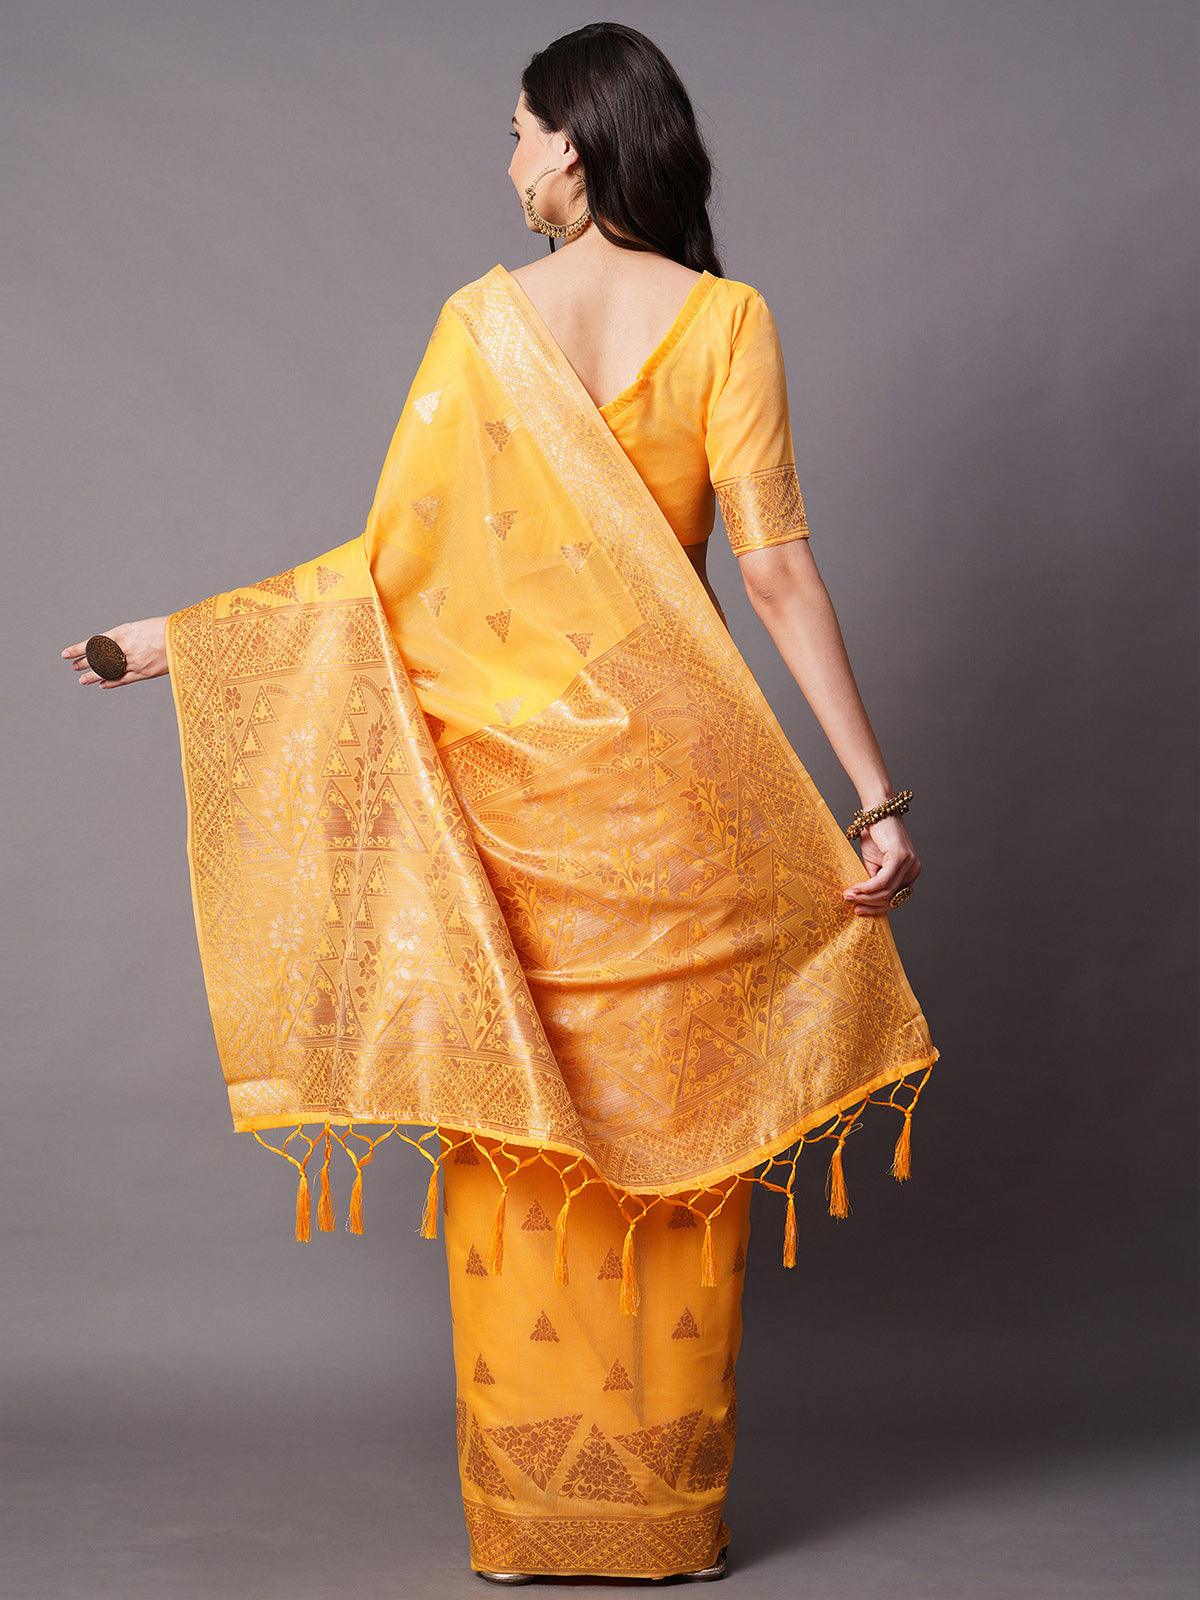 Yellow Festive Cotton silk Woven Design Saree With Unstitched Blouse - Odette